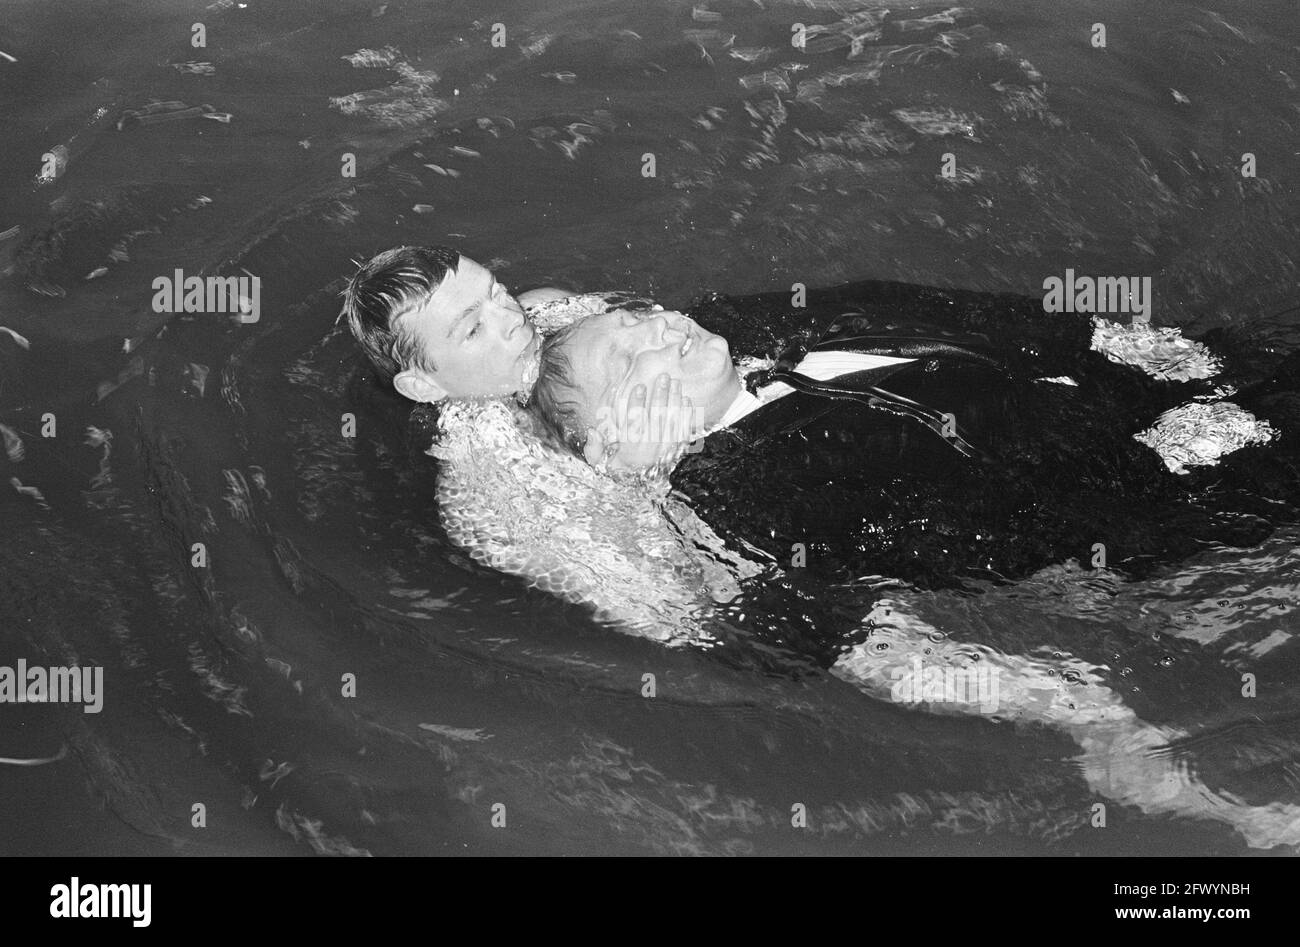 Water lessons, swimming rescue, 2 May 1966, DRIVING CLASSES, SWIMMING, The Netherlands, 20th century press agency photo, news to remember, documentary, historic photography 1945-1990, visual stories, human history of the Twentieth Century, capturing moments in time Stock Photo